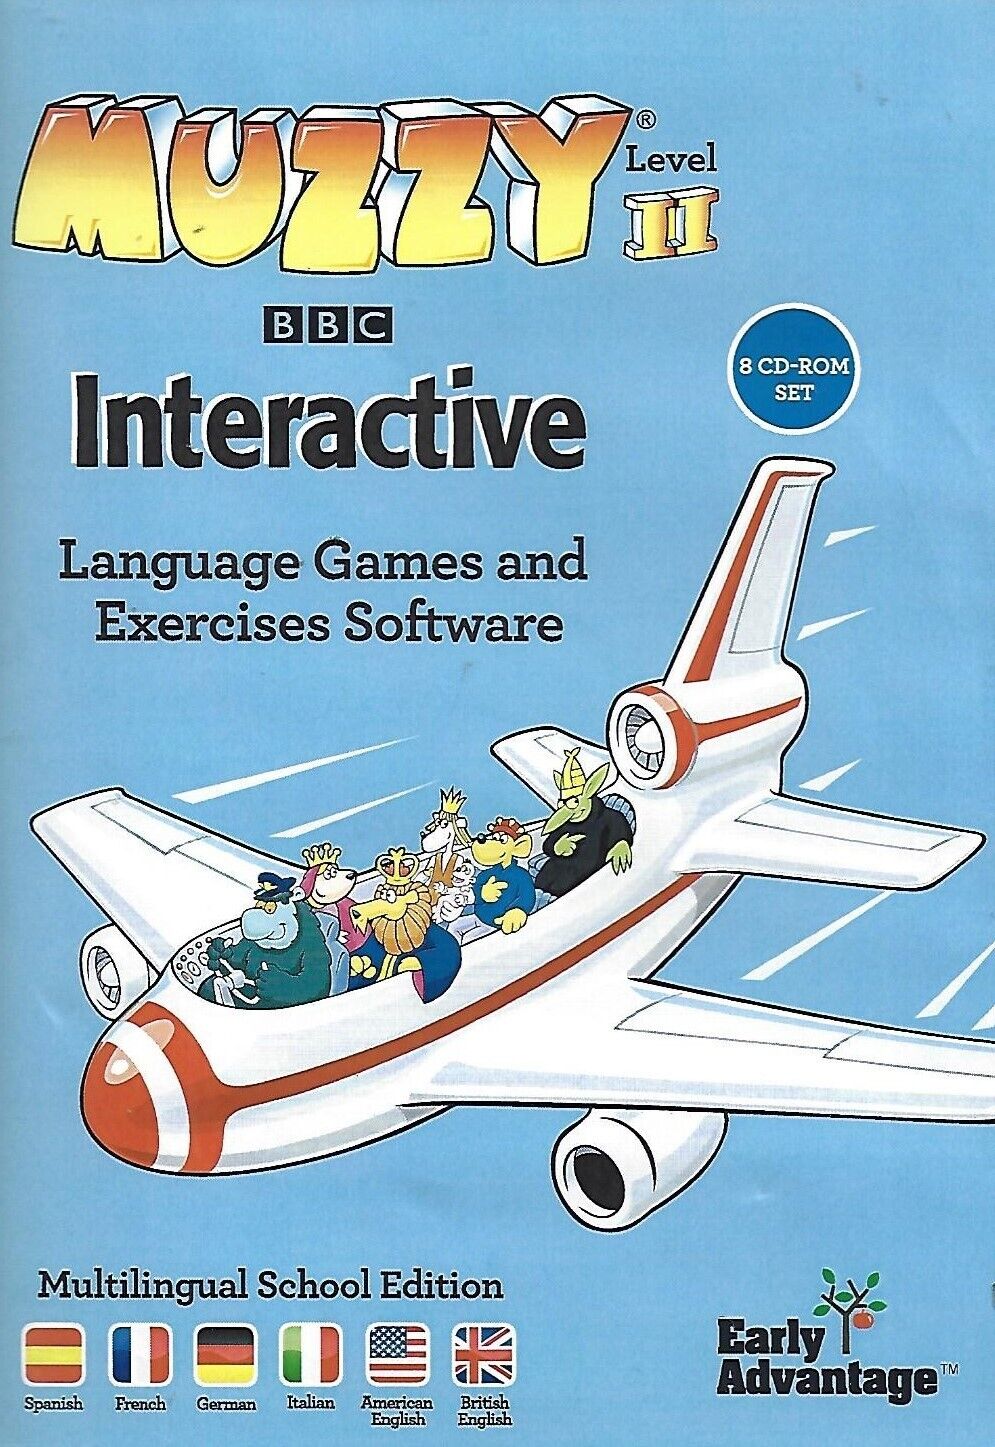 Muzzy Interactive Level II: Language Games and Exercises Software (CD, 8-Discs)